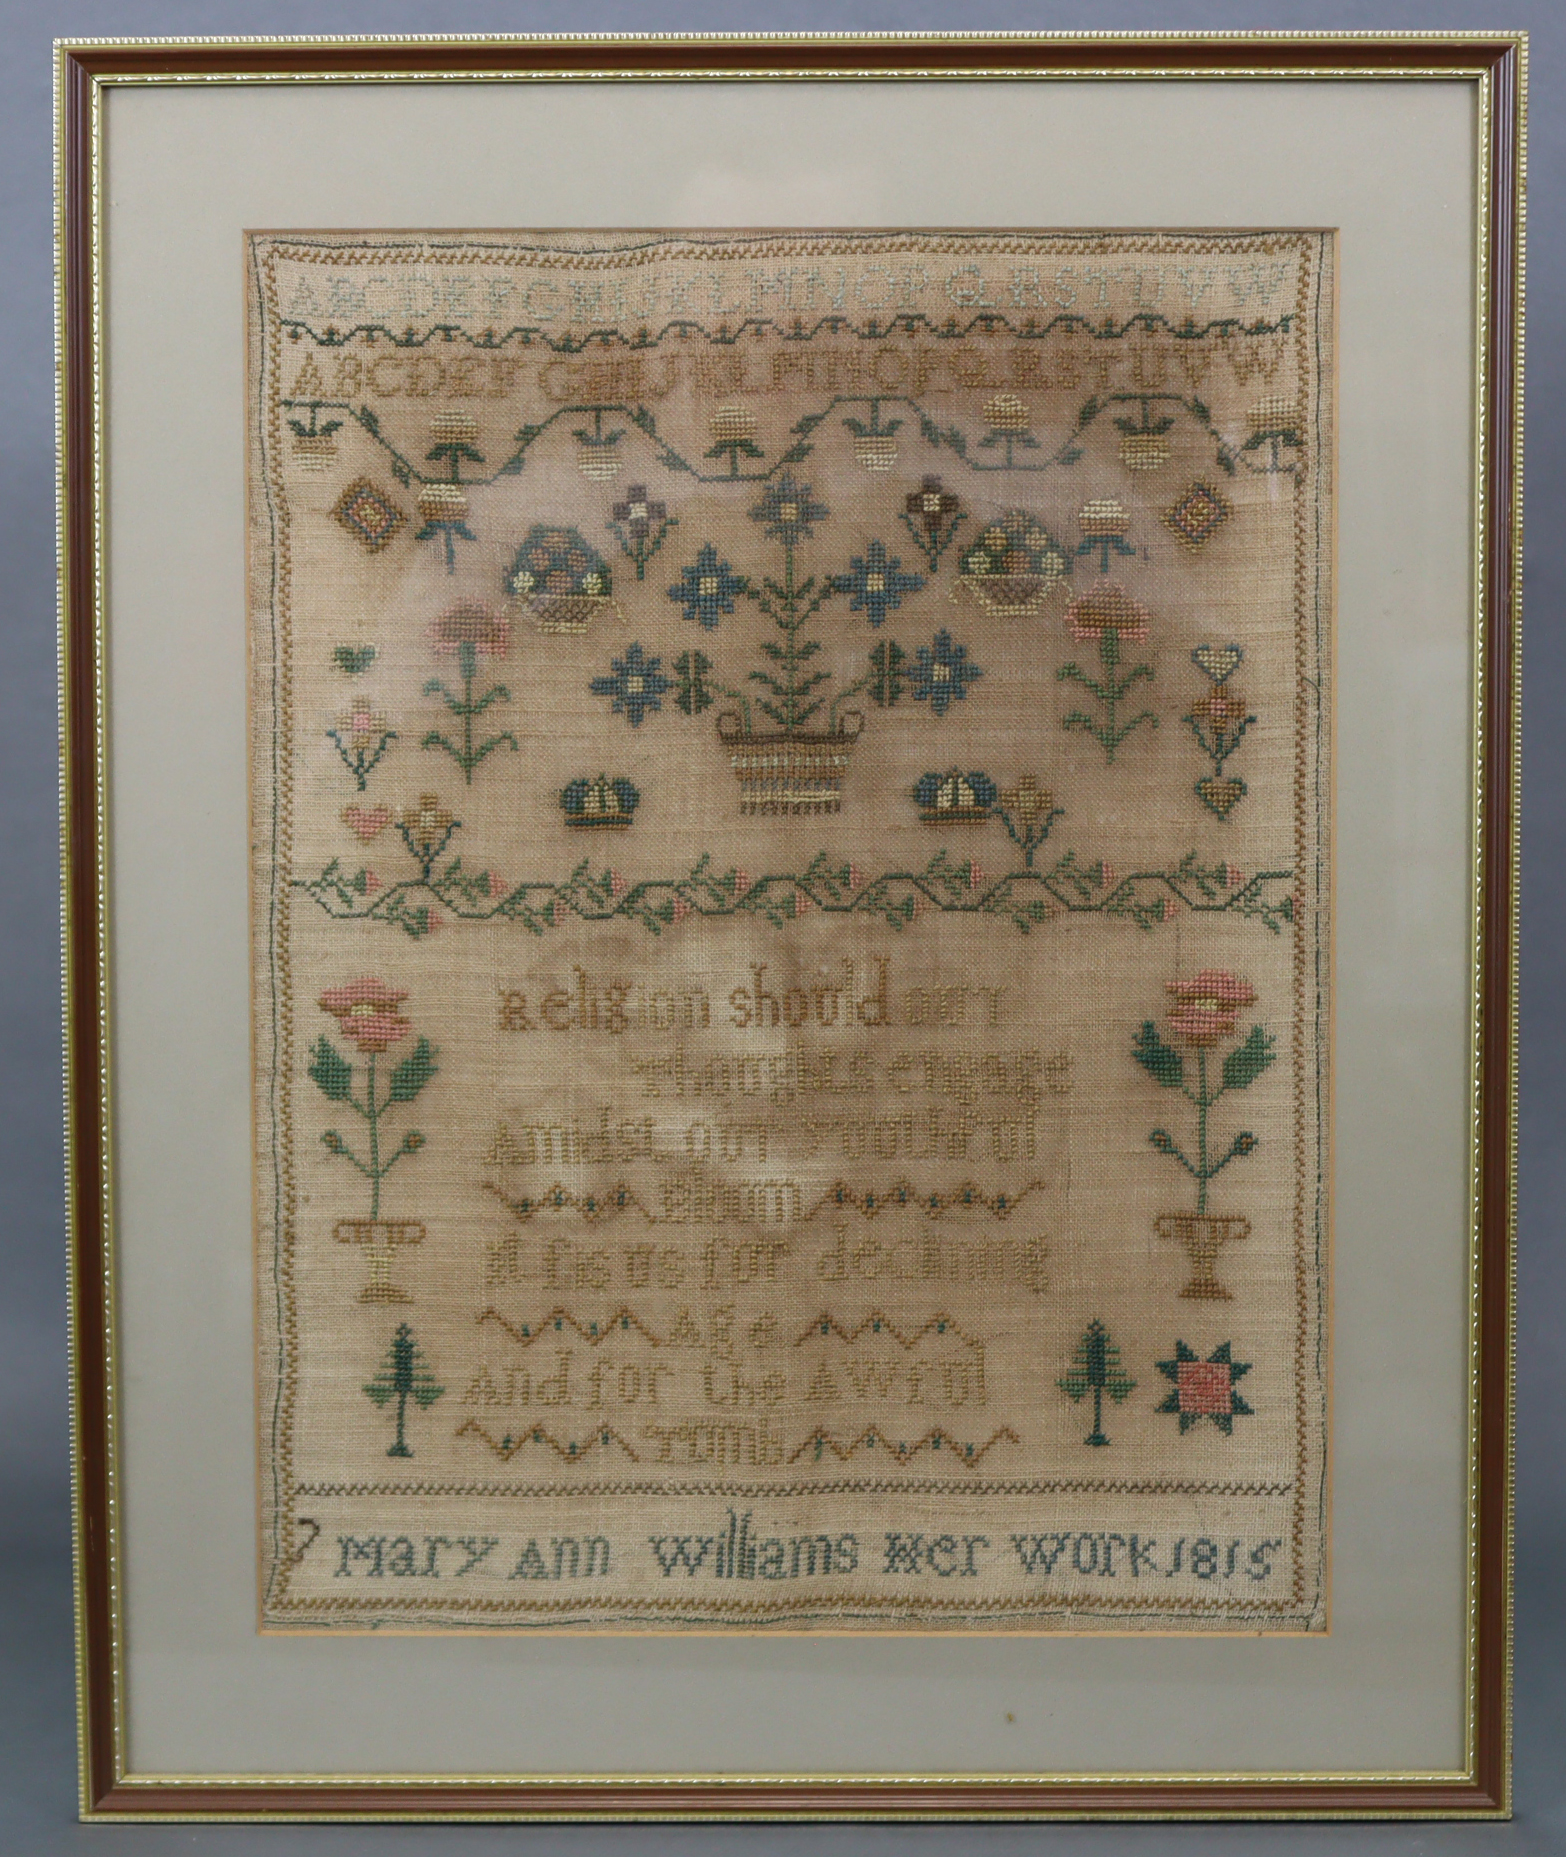 A George III silk needlework sampler inscribed “Mary Ann Williams, Her Work, 1815”, with alphabet,